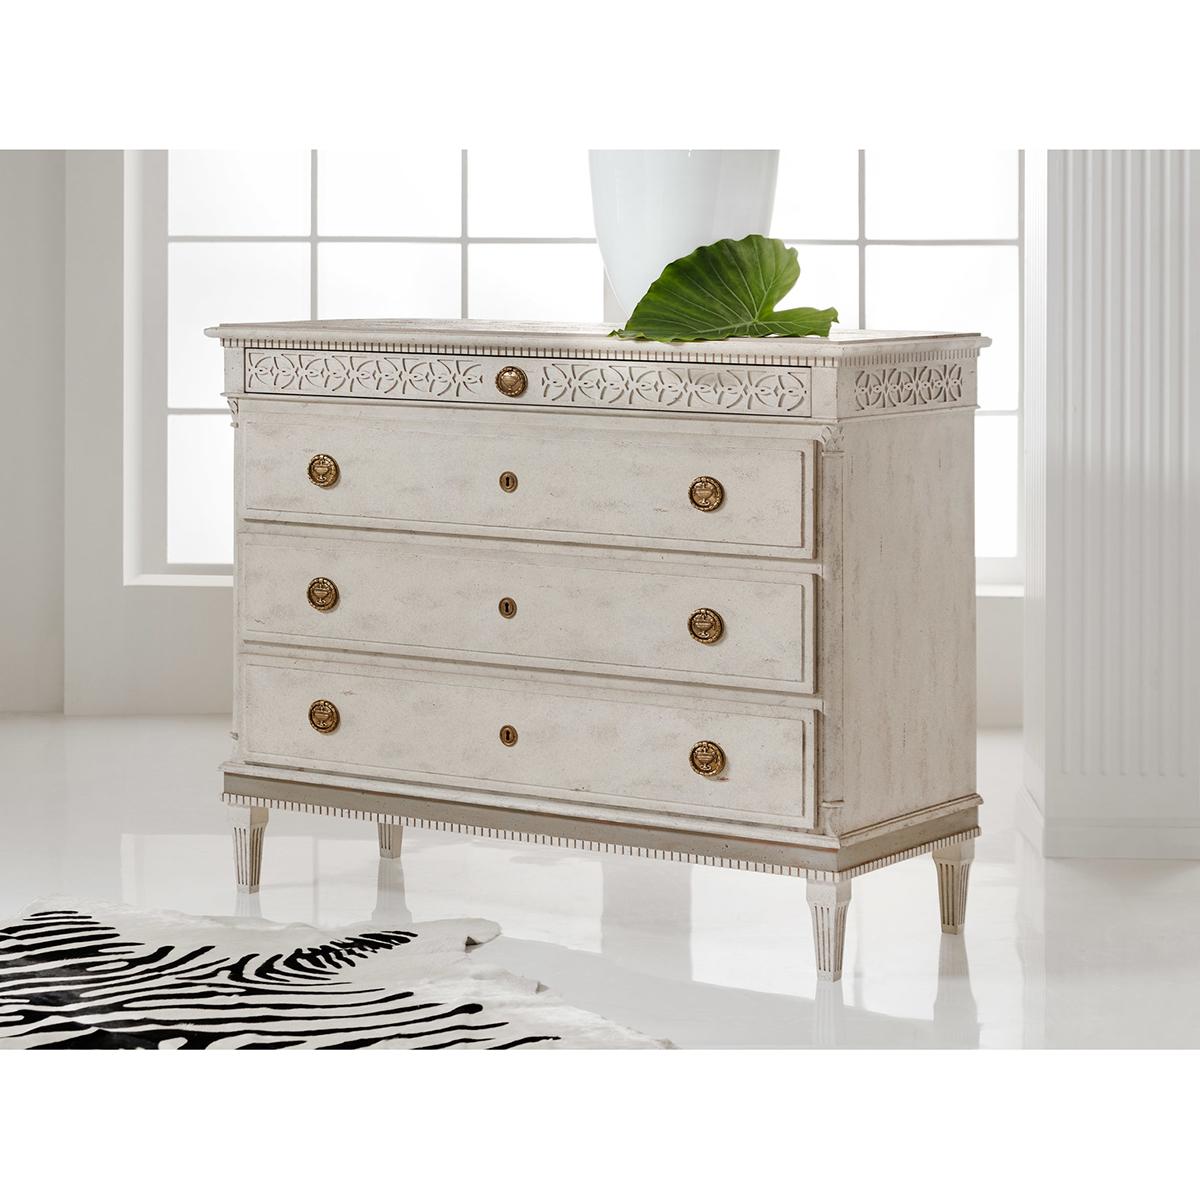 Gustavian Style Swedish Dresser, large four-drawer commode with an antique painted finish, with carved dental moldings, blind fret carings, with large long drawers, brass ring pull hardware and raised on square tapered fluted legs. After the 19th